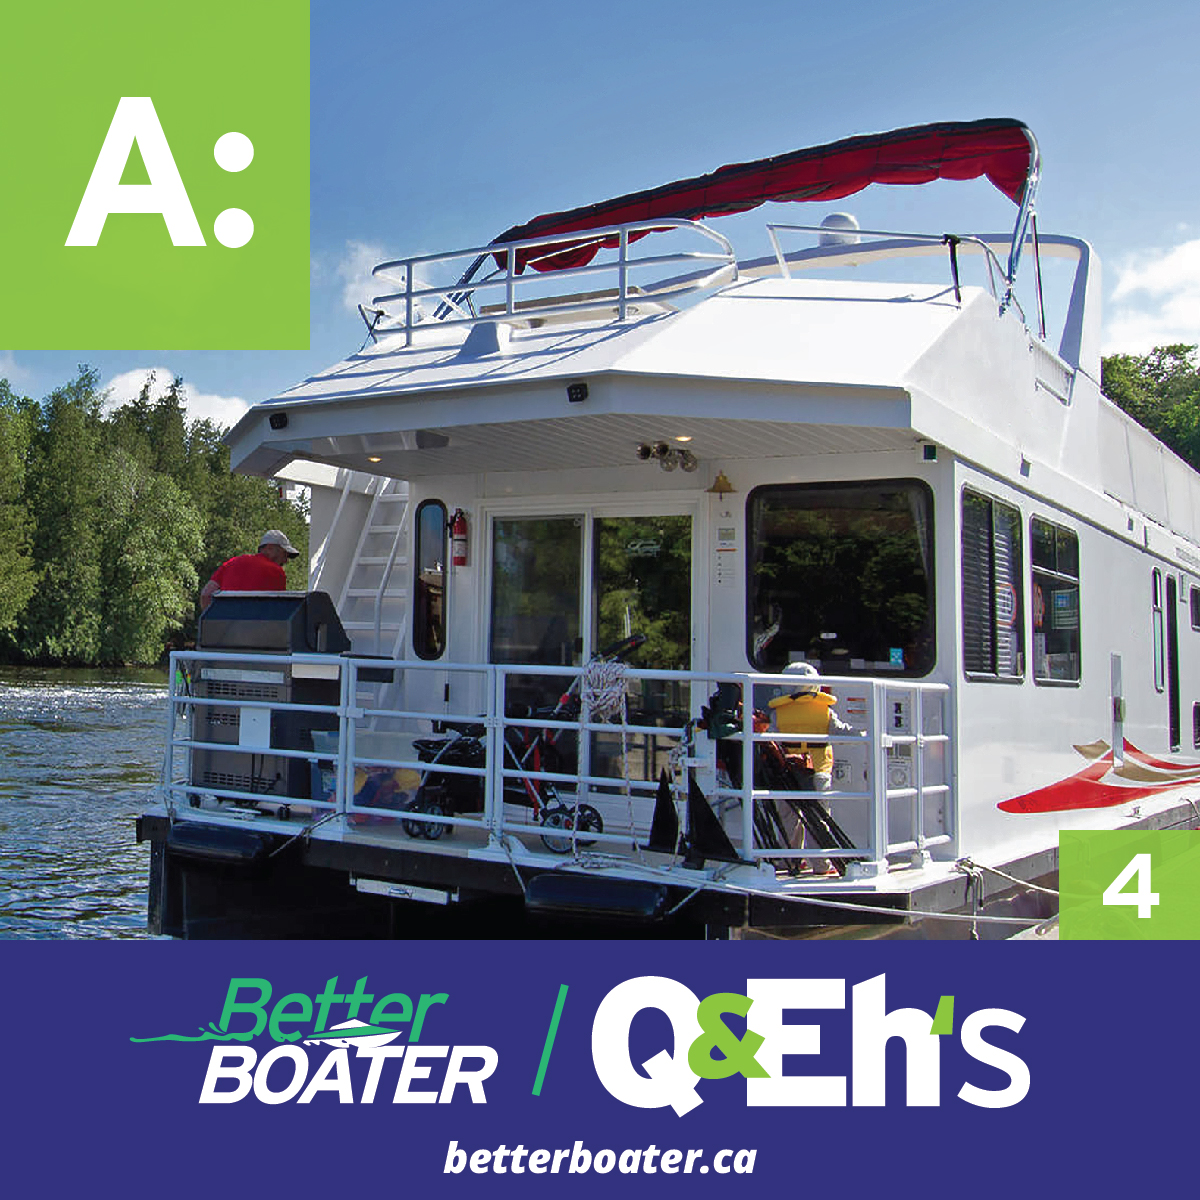 https://betterboater.ca/Q&Eh:%20Drinking%20Dock